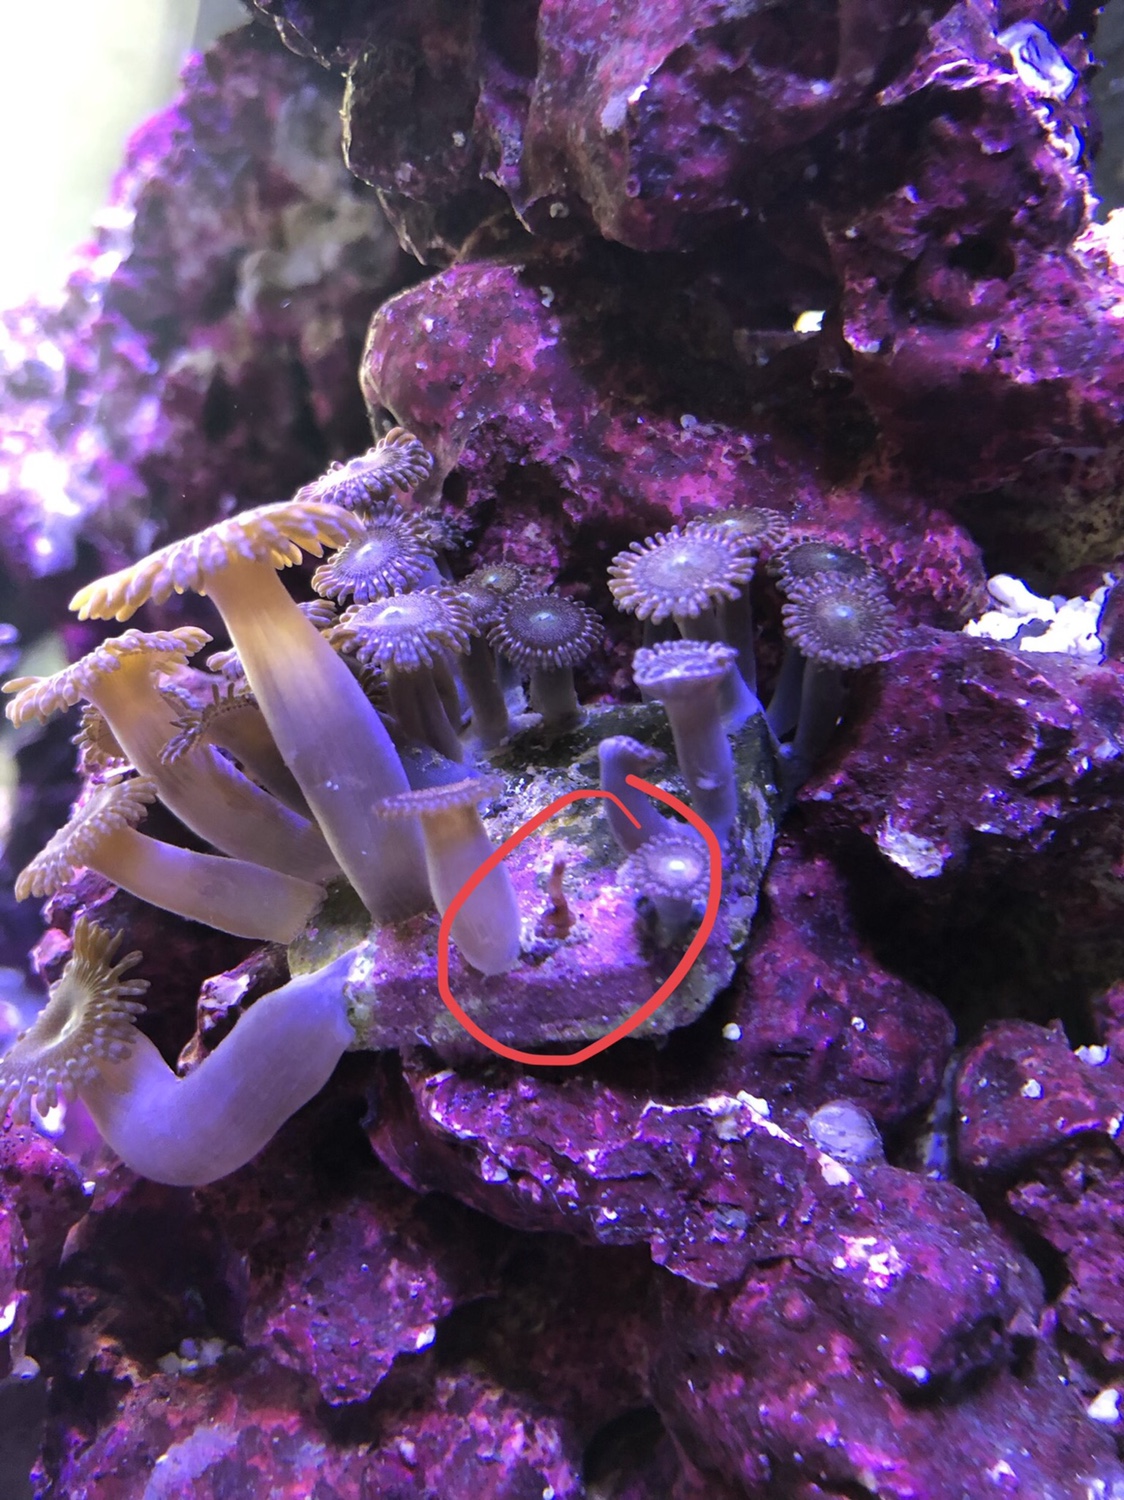 Vermetid Snail And Slimy Strings On Zoa Reef2reef Saltwater And